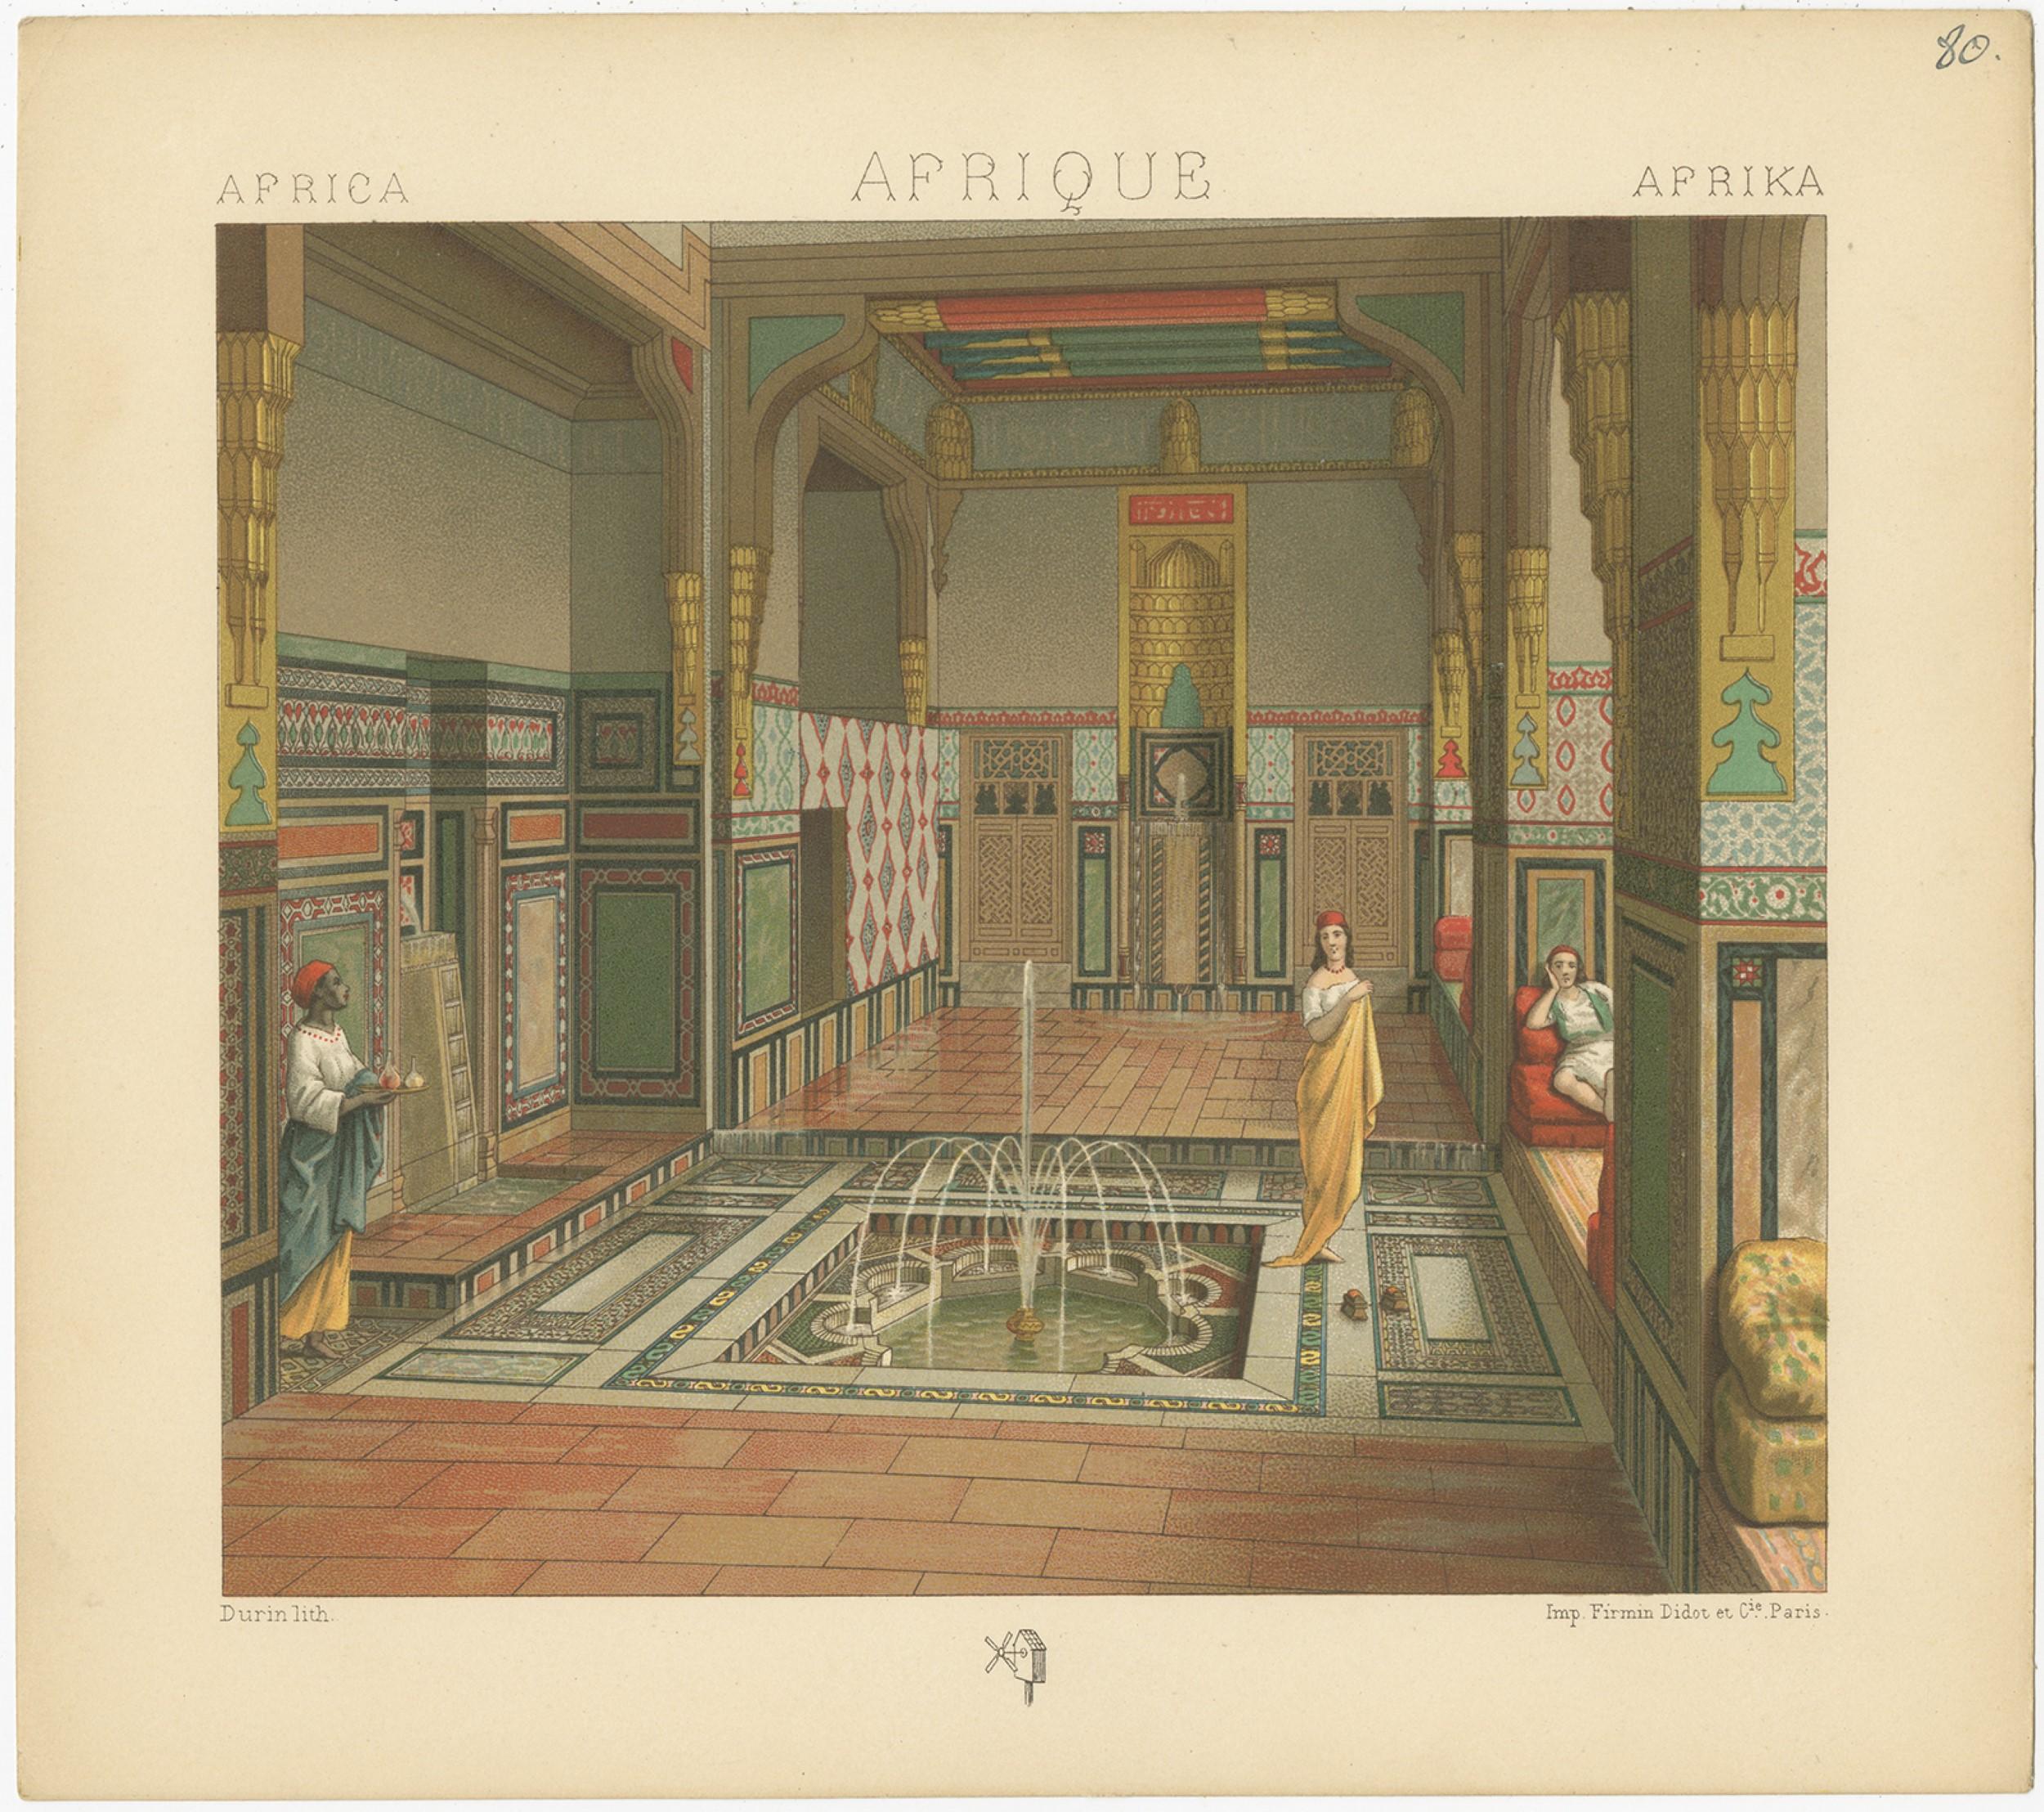 Antique print titled 'Africa - Afrique - Afrika'. Chromolithograph of African Interior. This print originates from 'Le Costume Historique' by M.A. Racinet. Published, circa 1880.